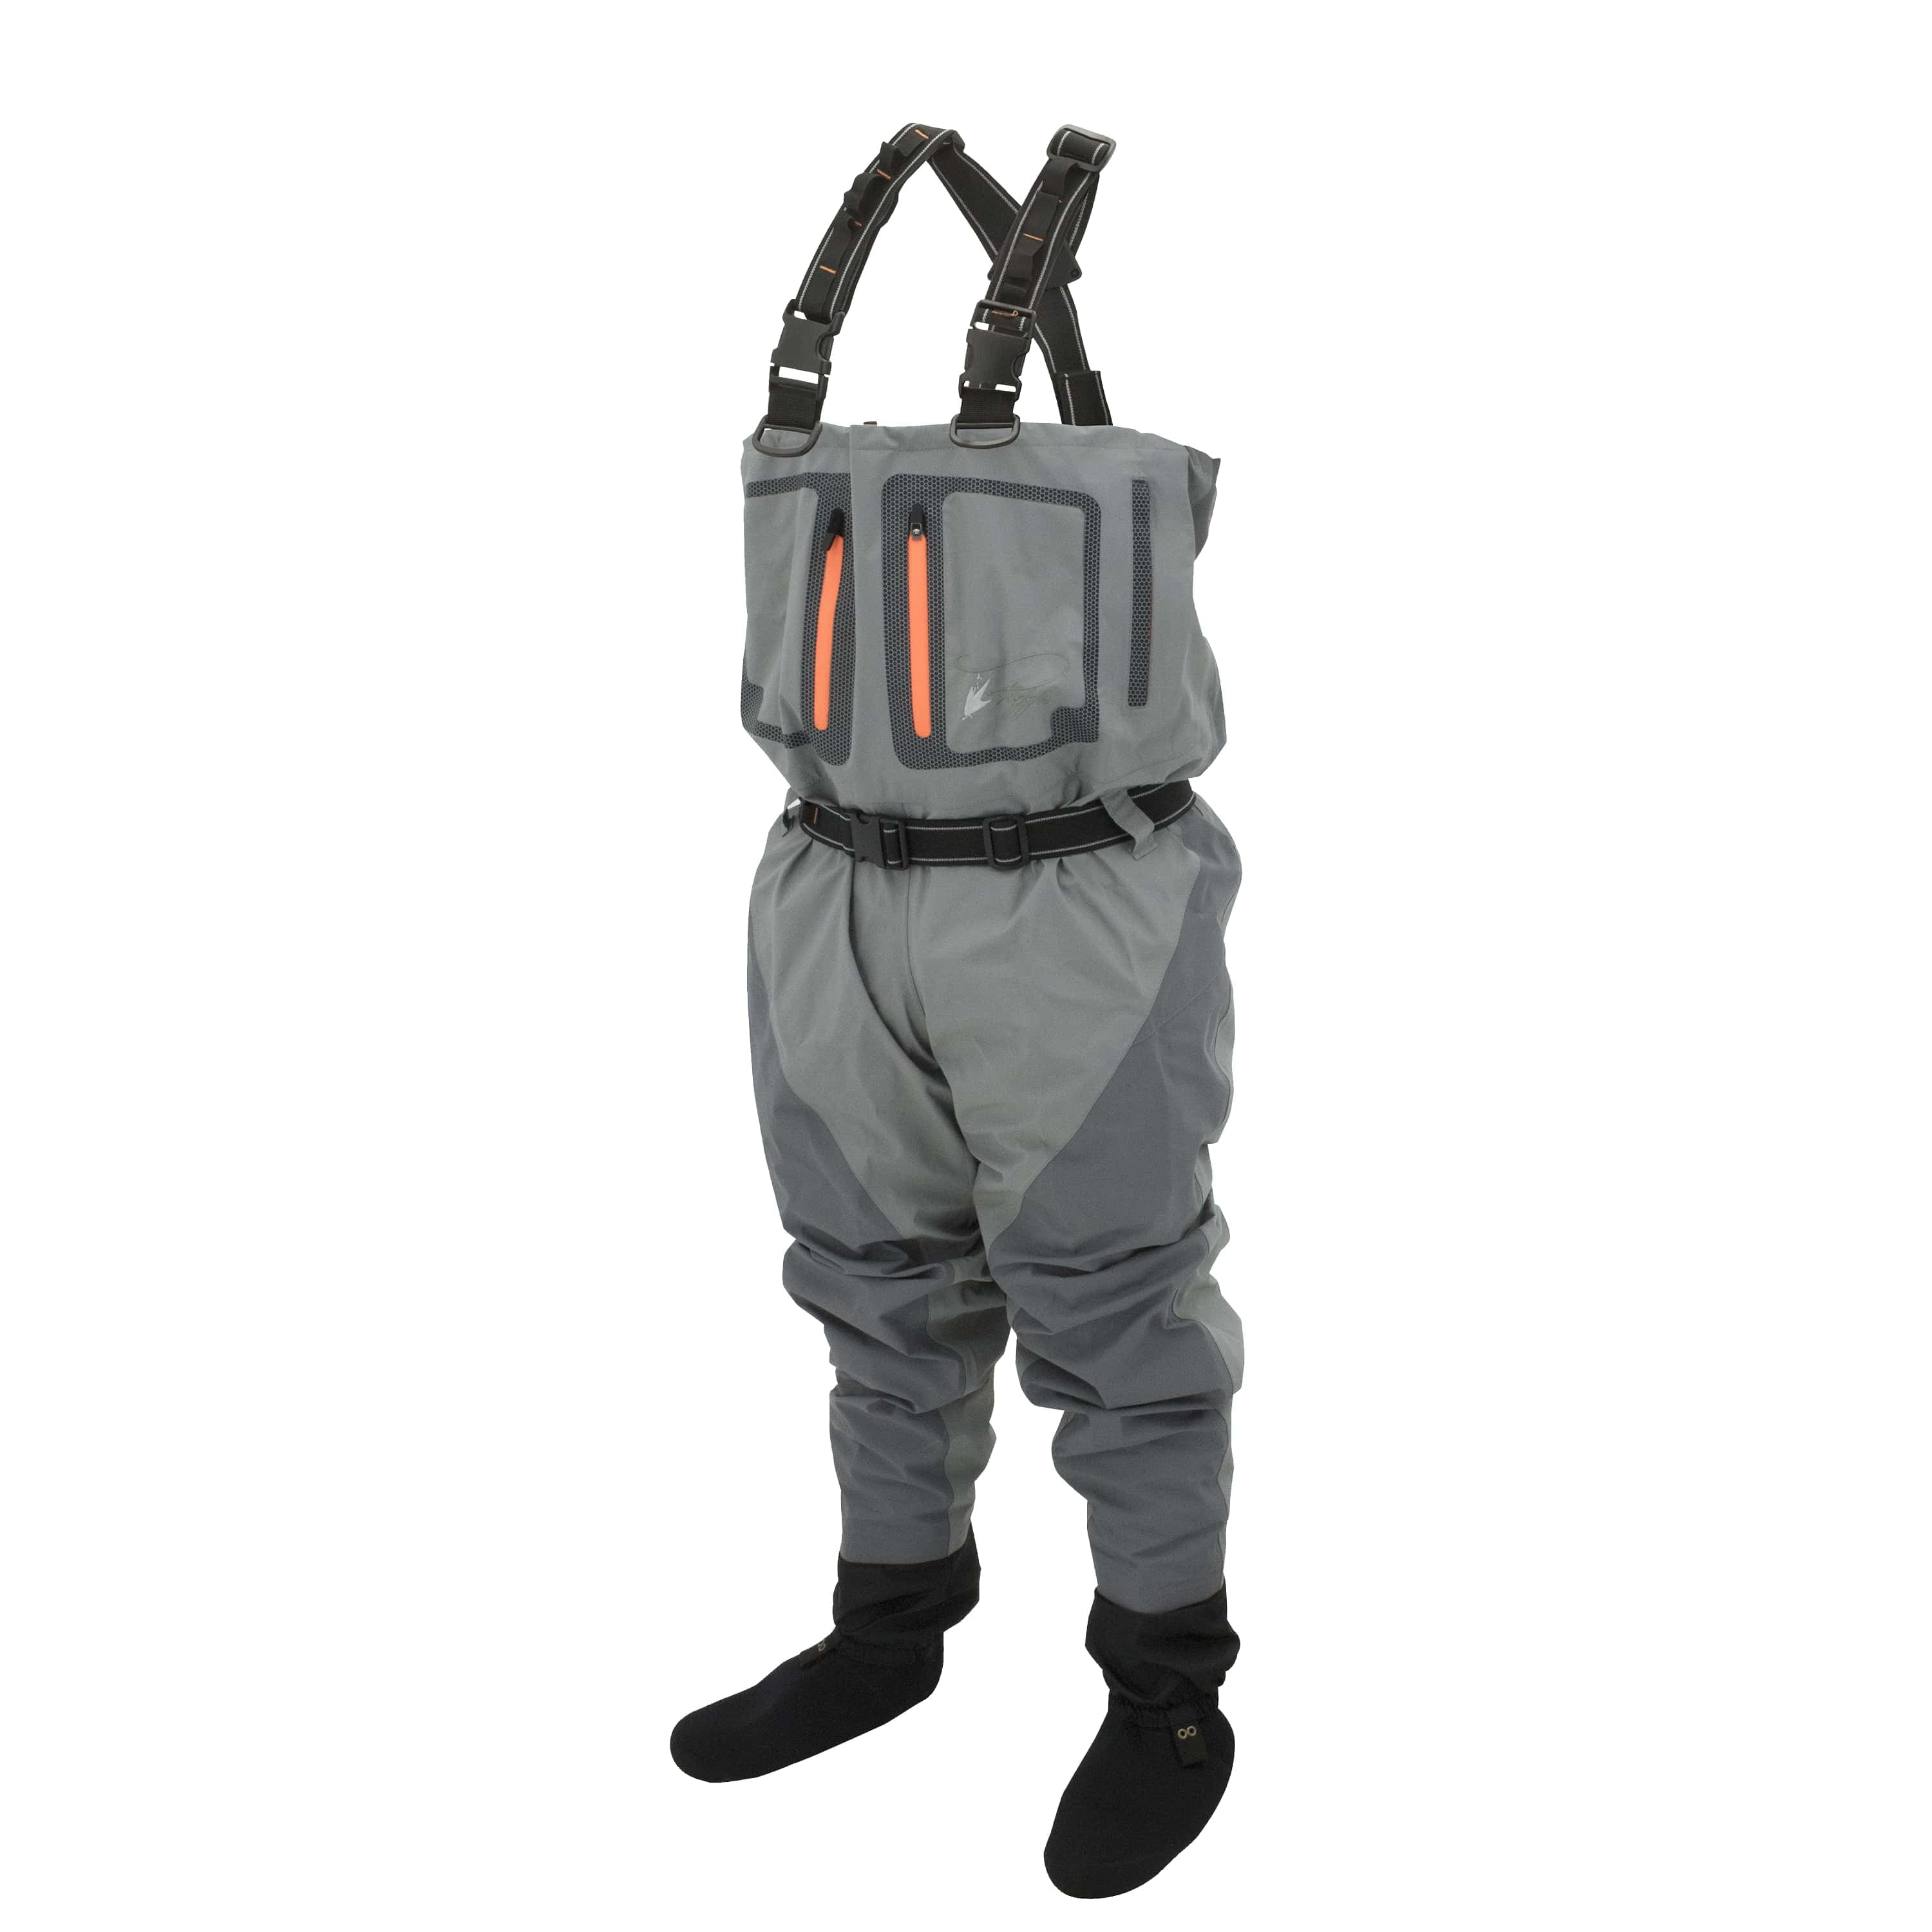 8 Fans Waist Waders,3-Ply Durable Breathable Waterproof